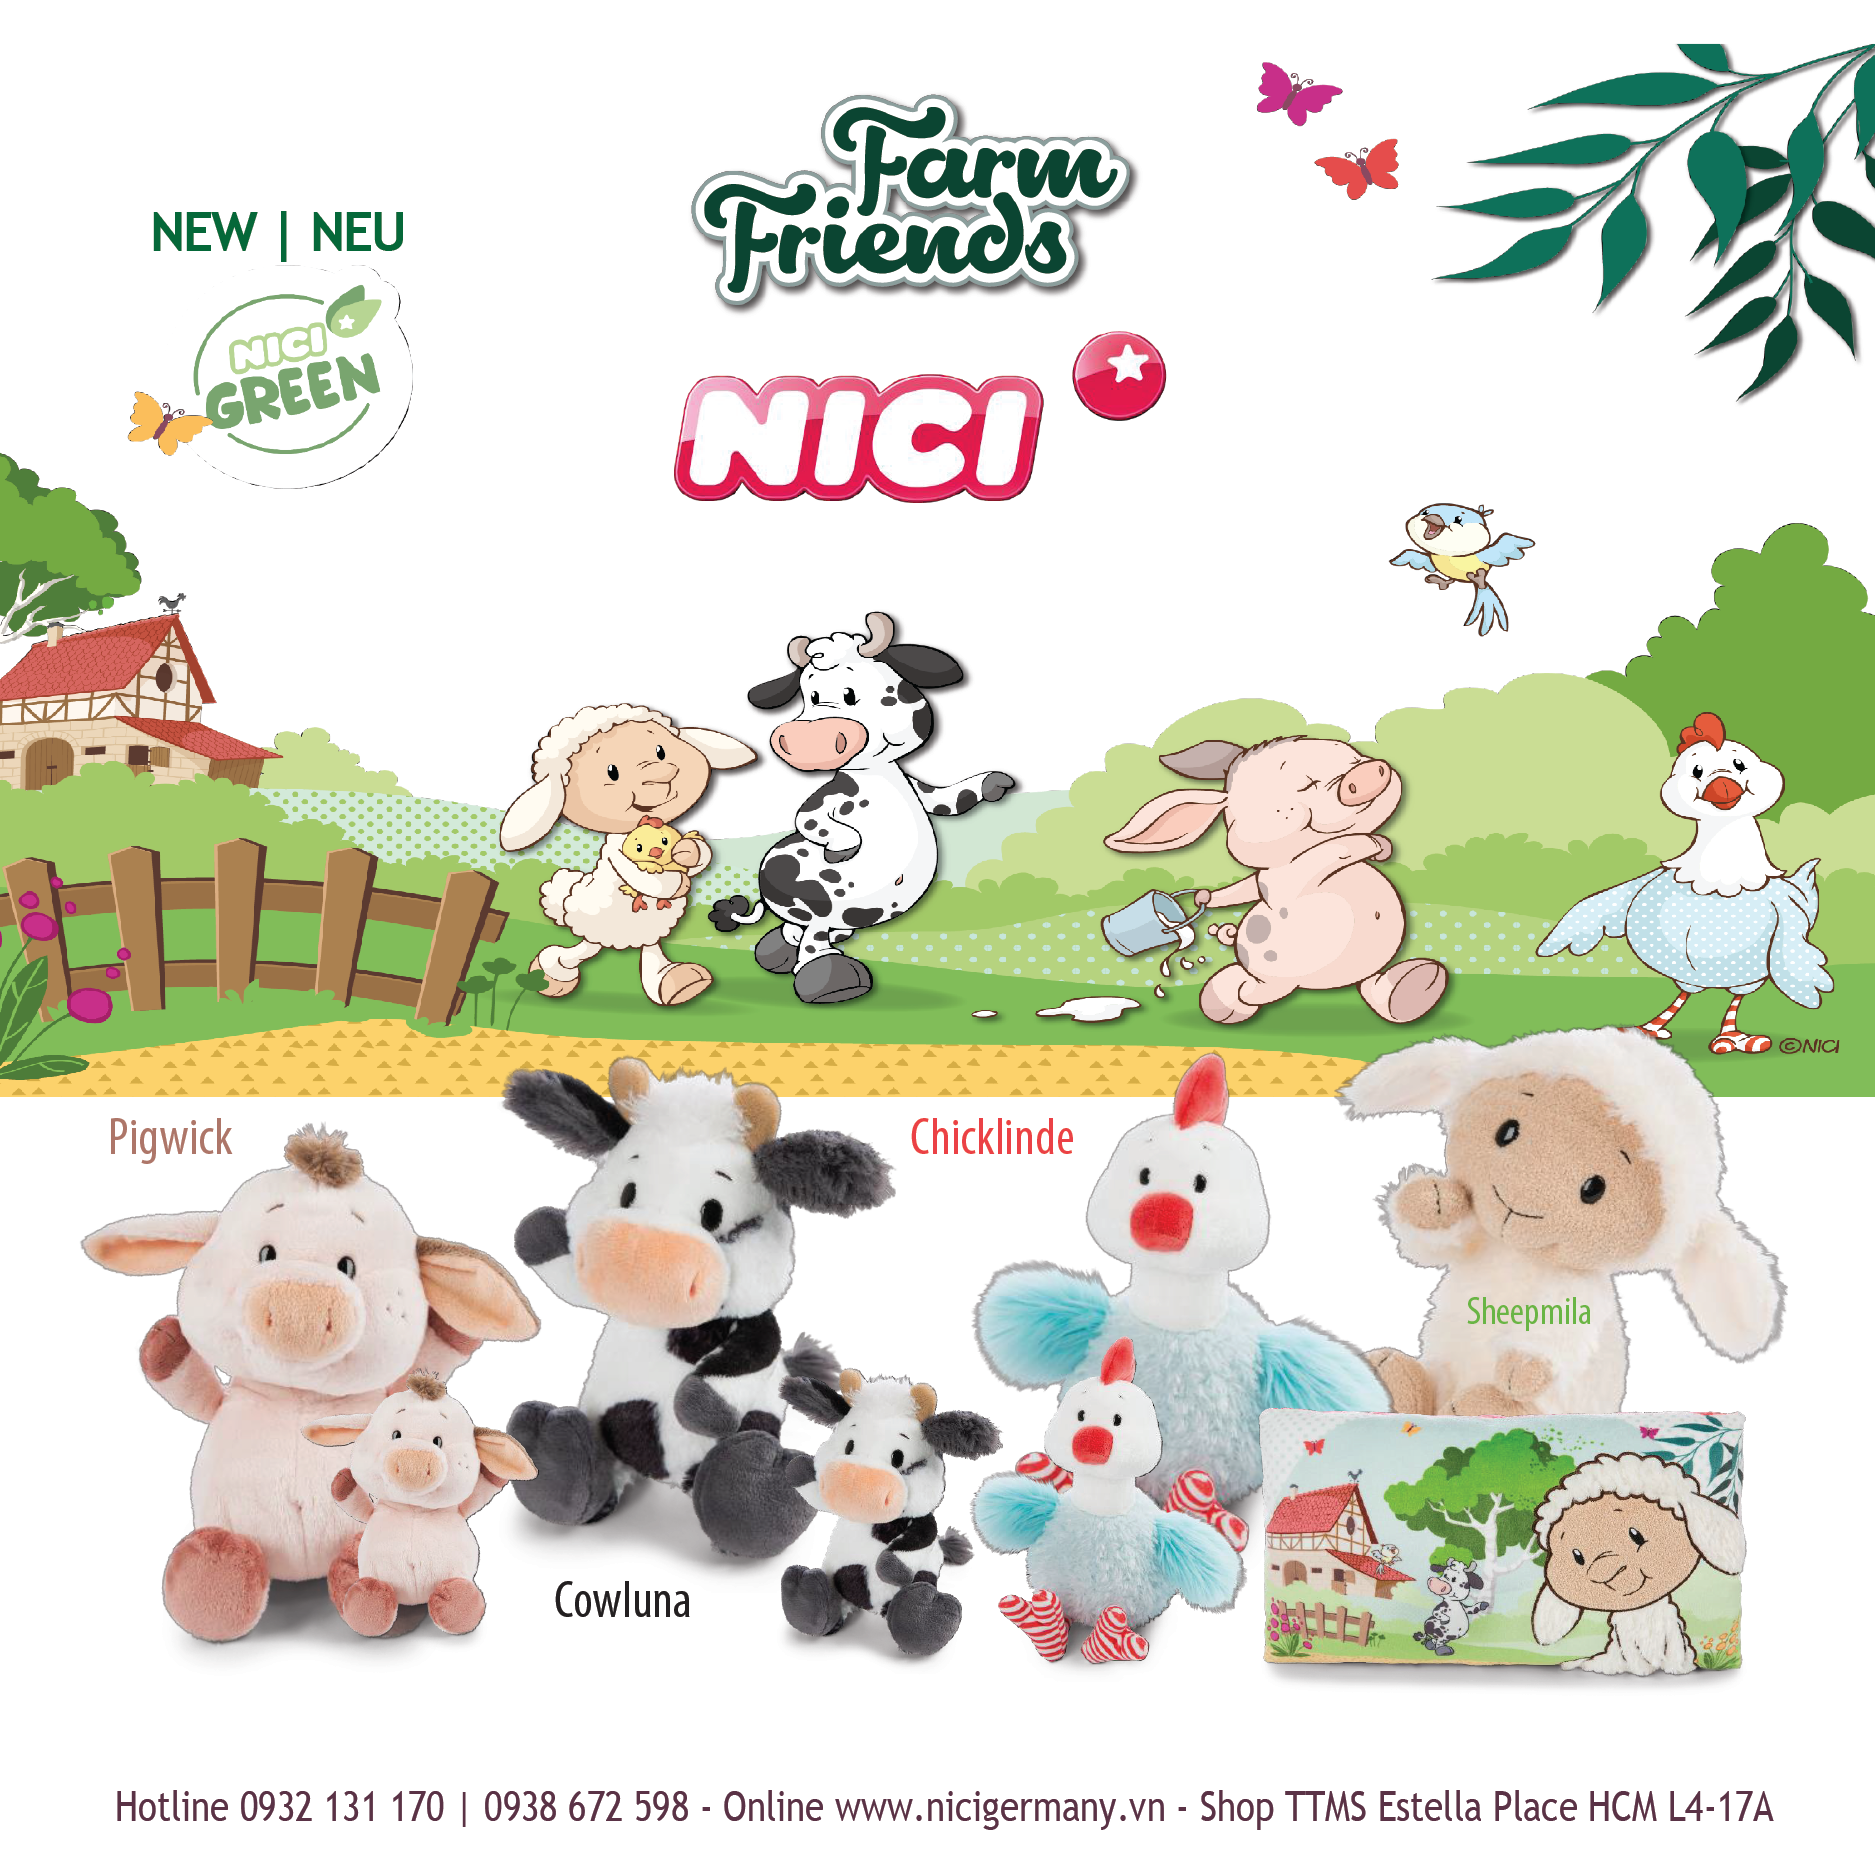 WONDERFUL TIME FOR A CHRISTMAS JOURNEY WITH NICI GERMANY